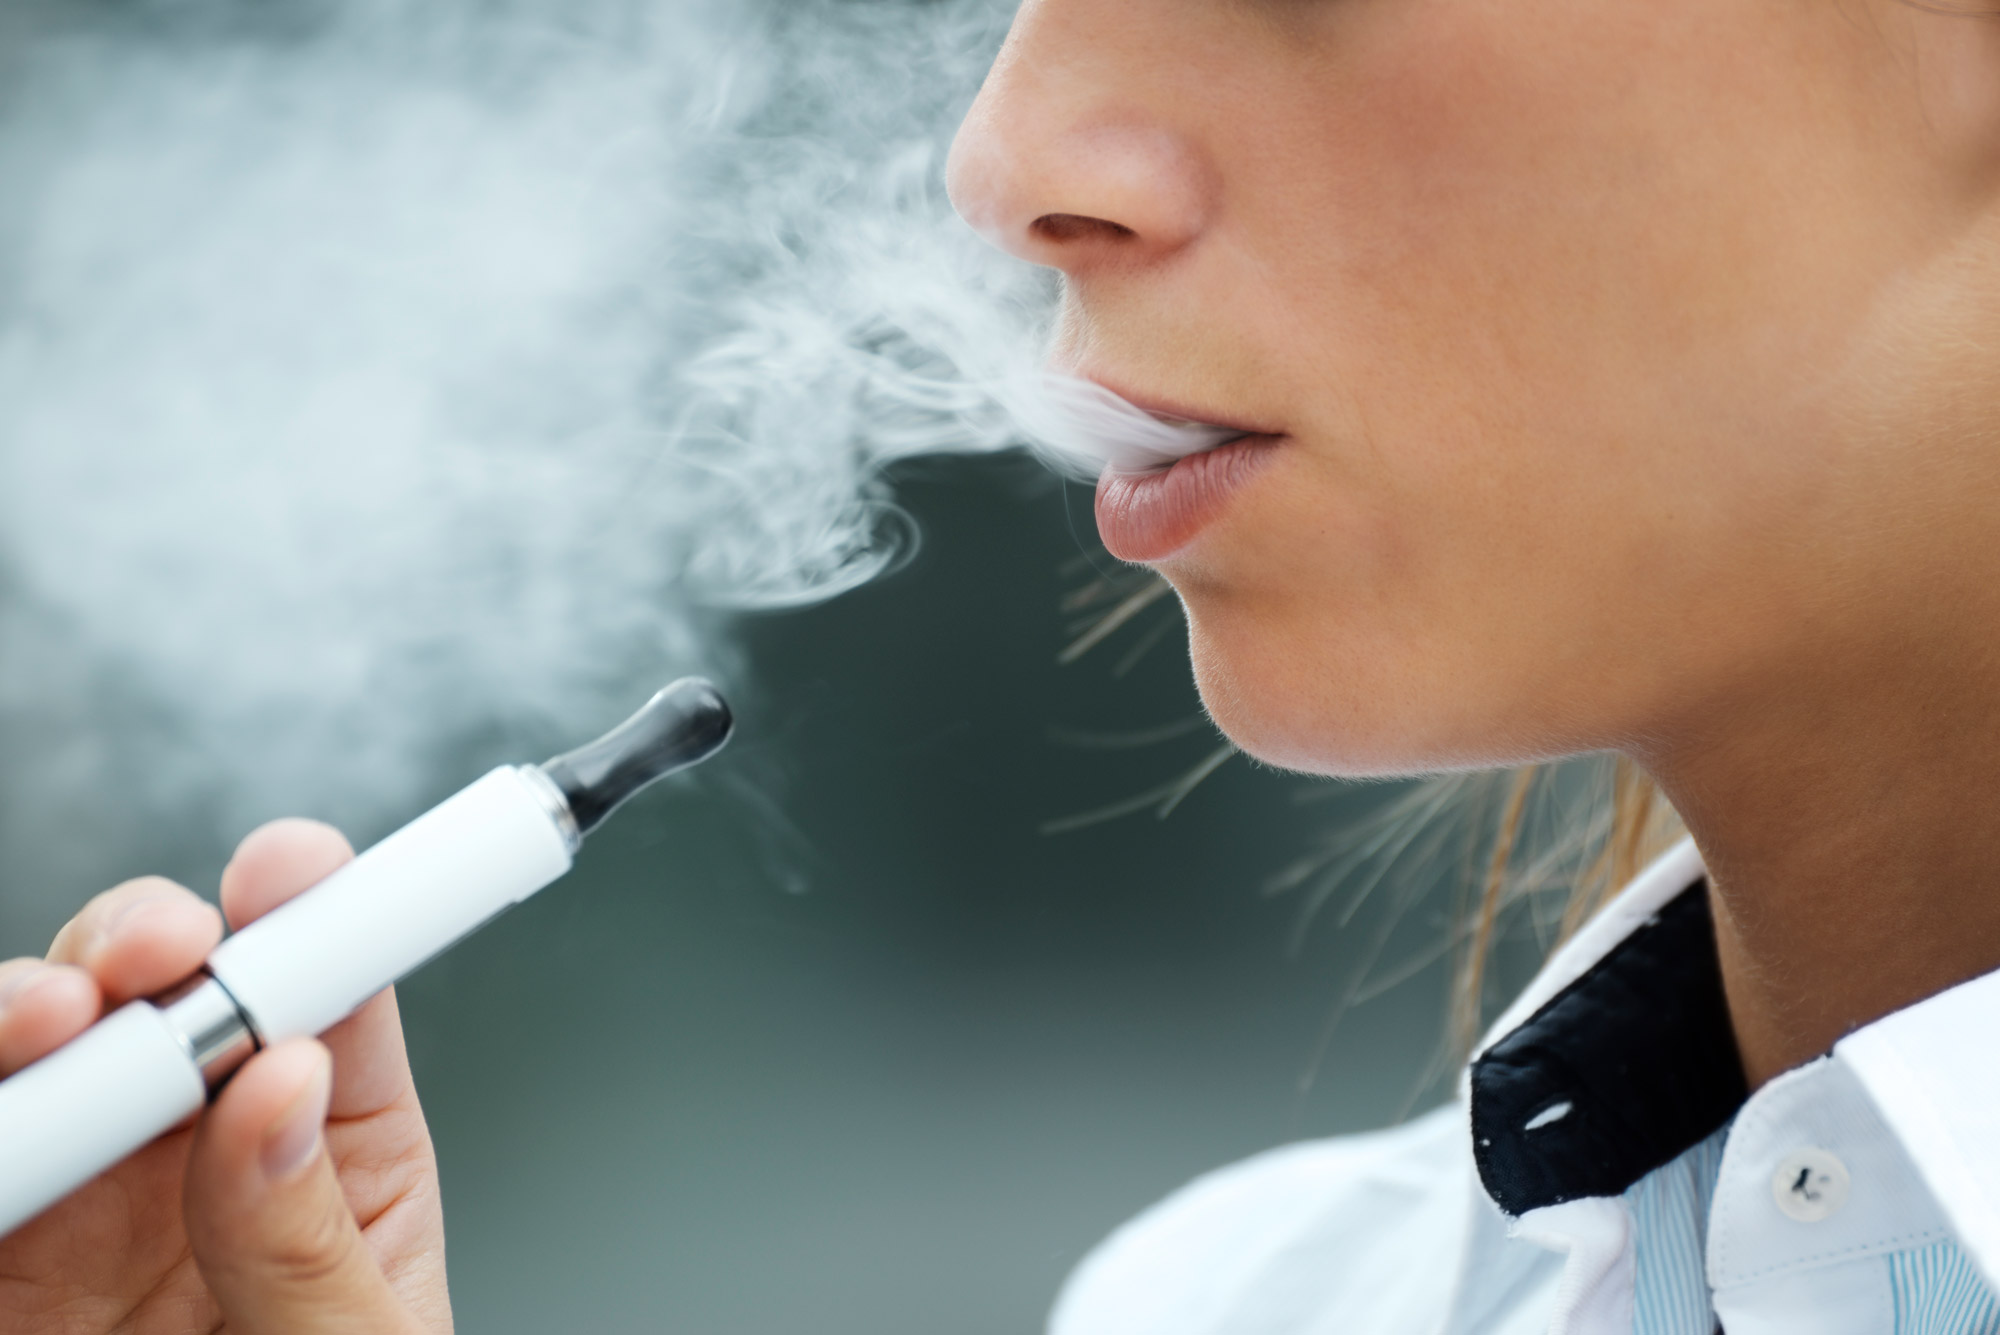 Vaping Could Make You 40 Percent More Likely to Get Respiratory Disease |  The Brink | Boston University